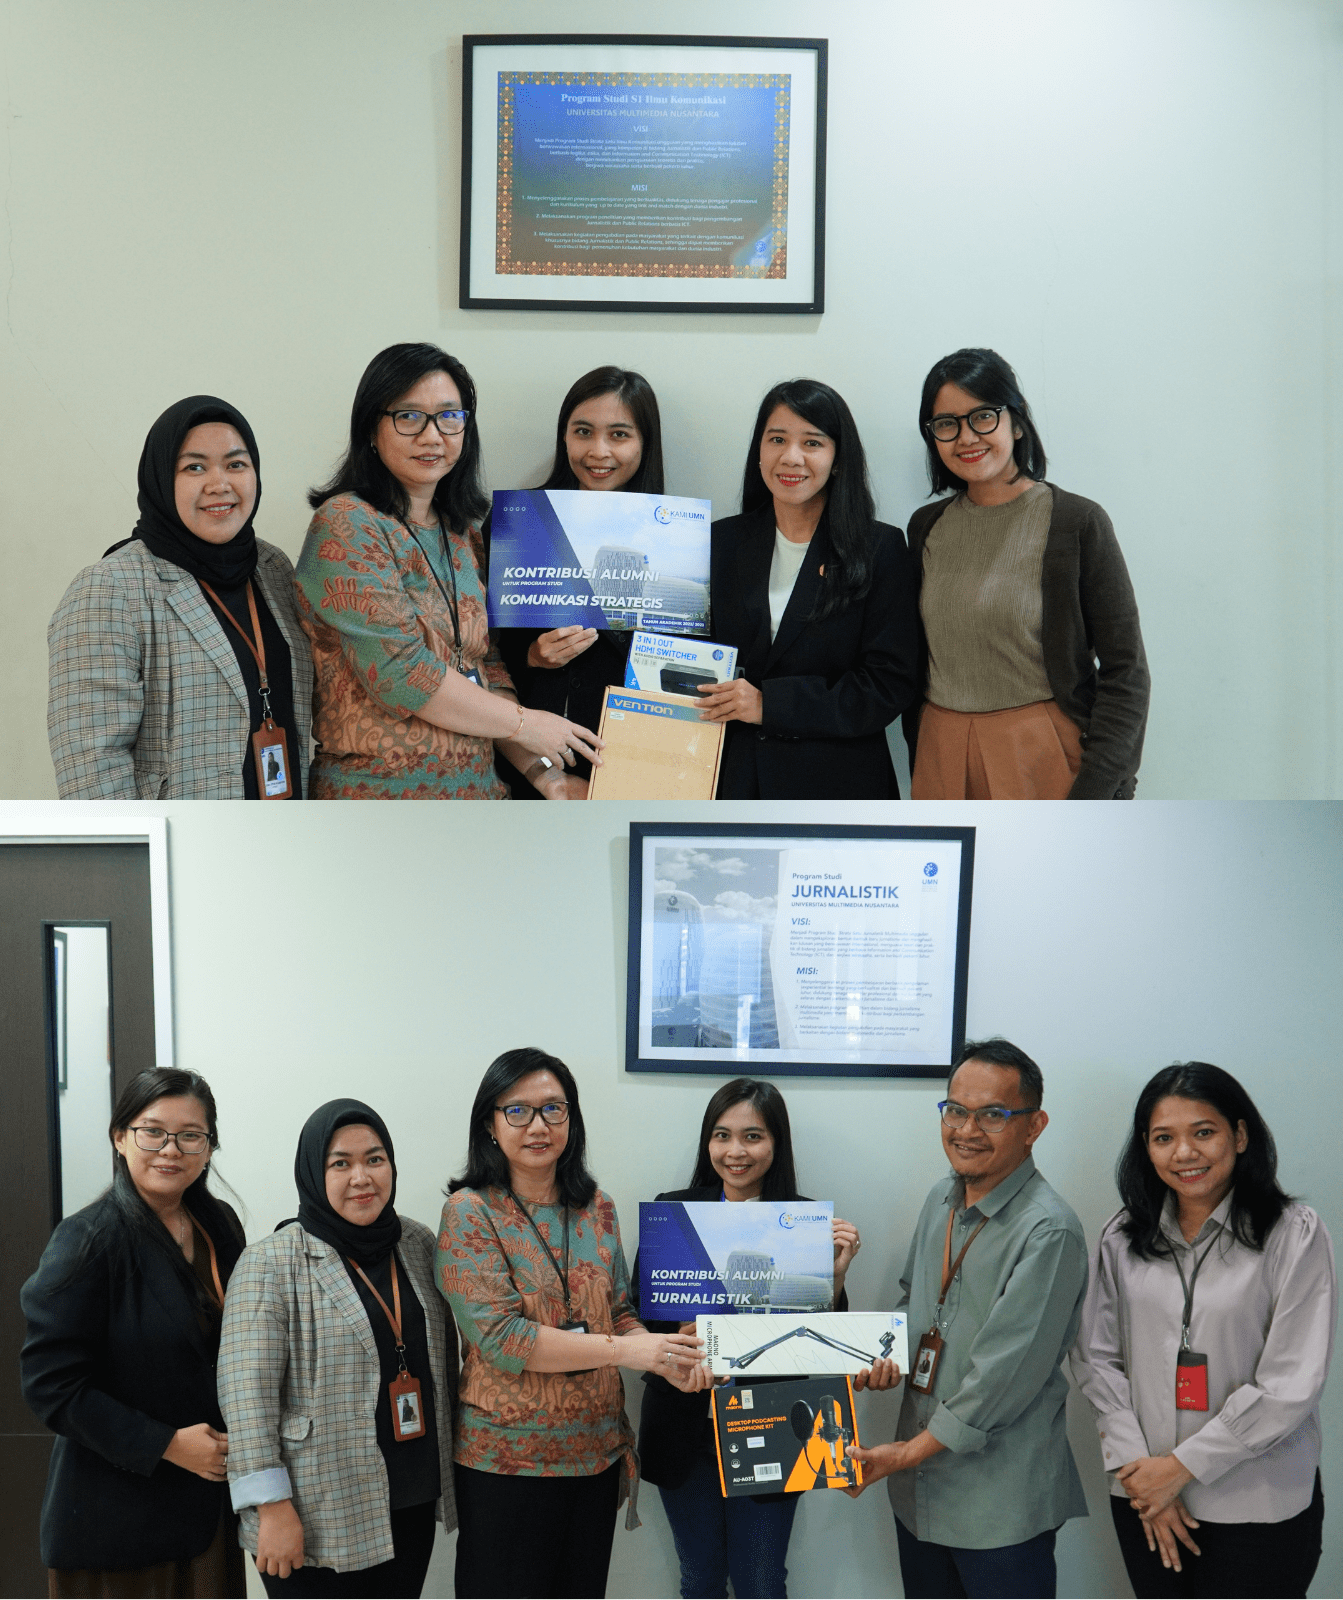 KAMI UMN Gifts Laboratory Equipment to The Faculty of Communication Sciences